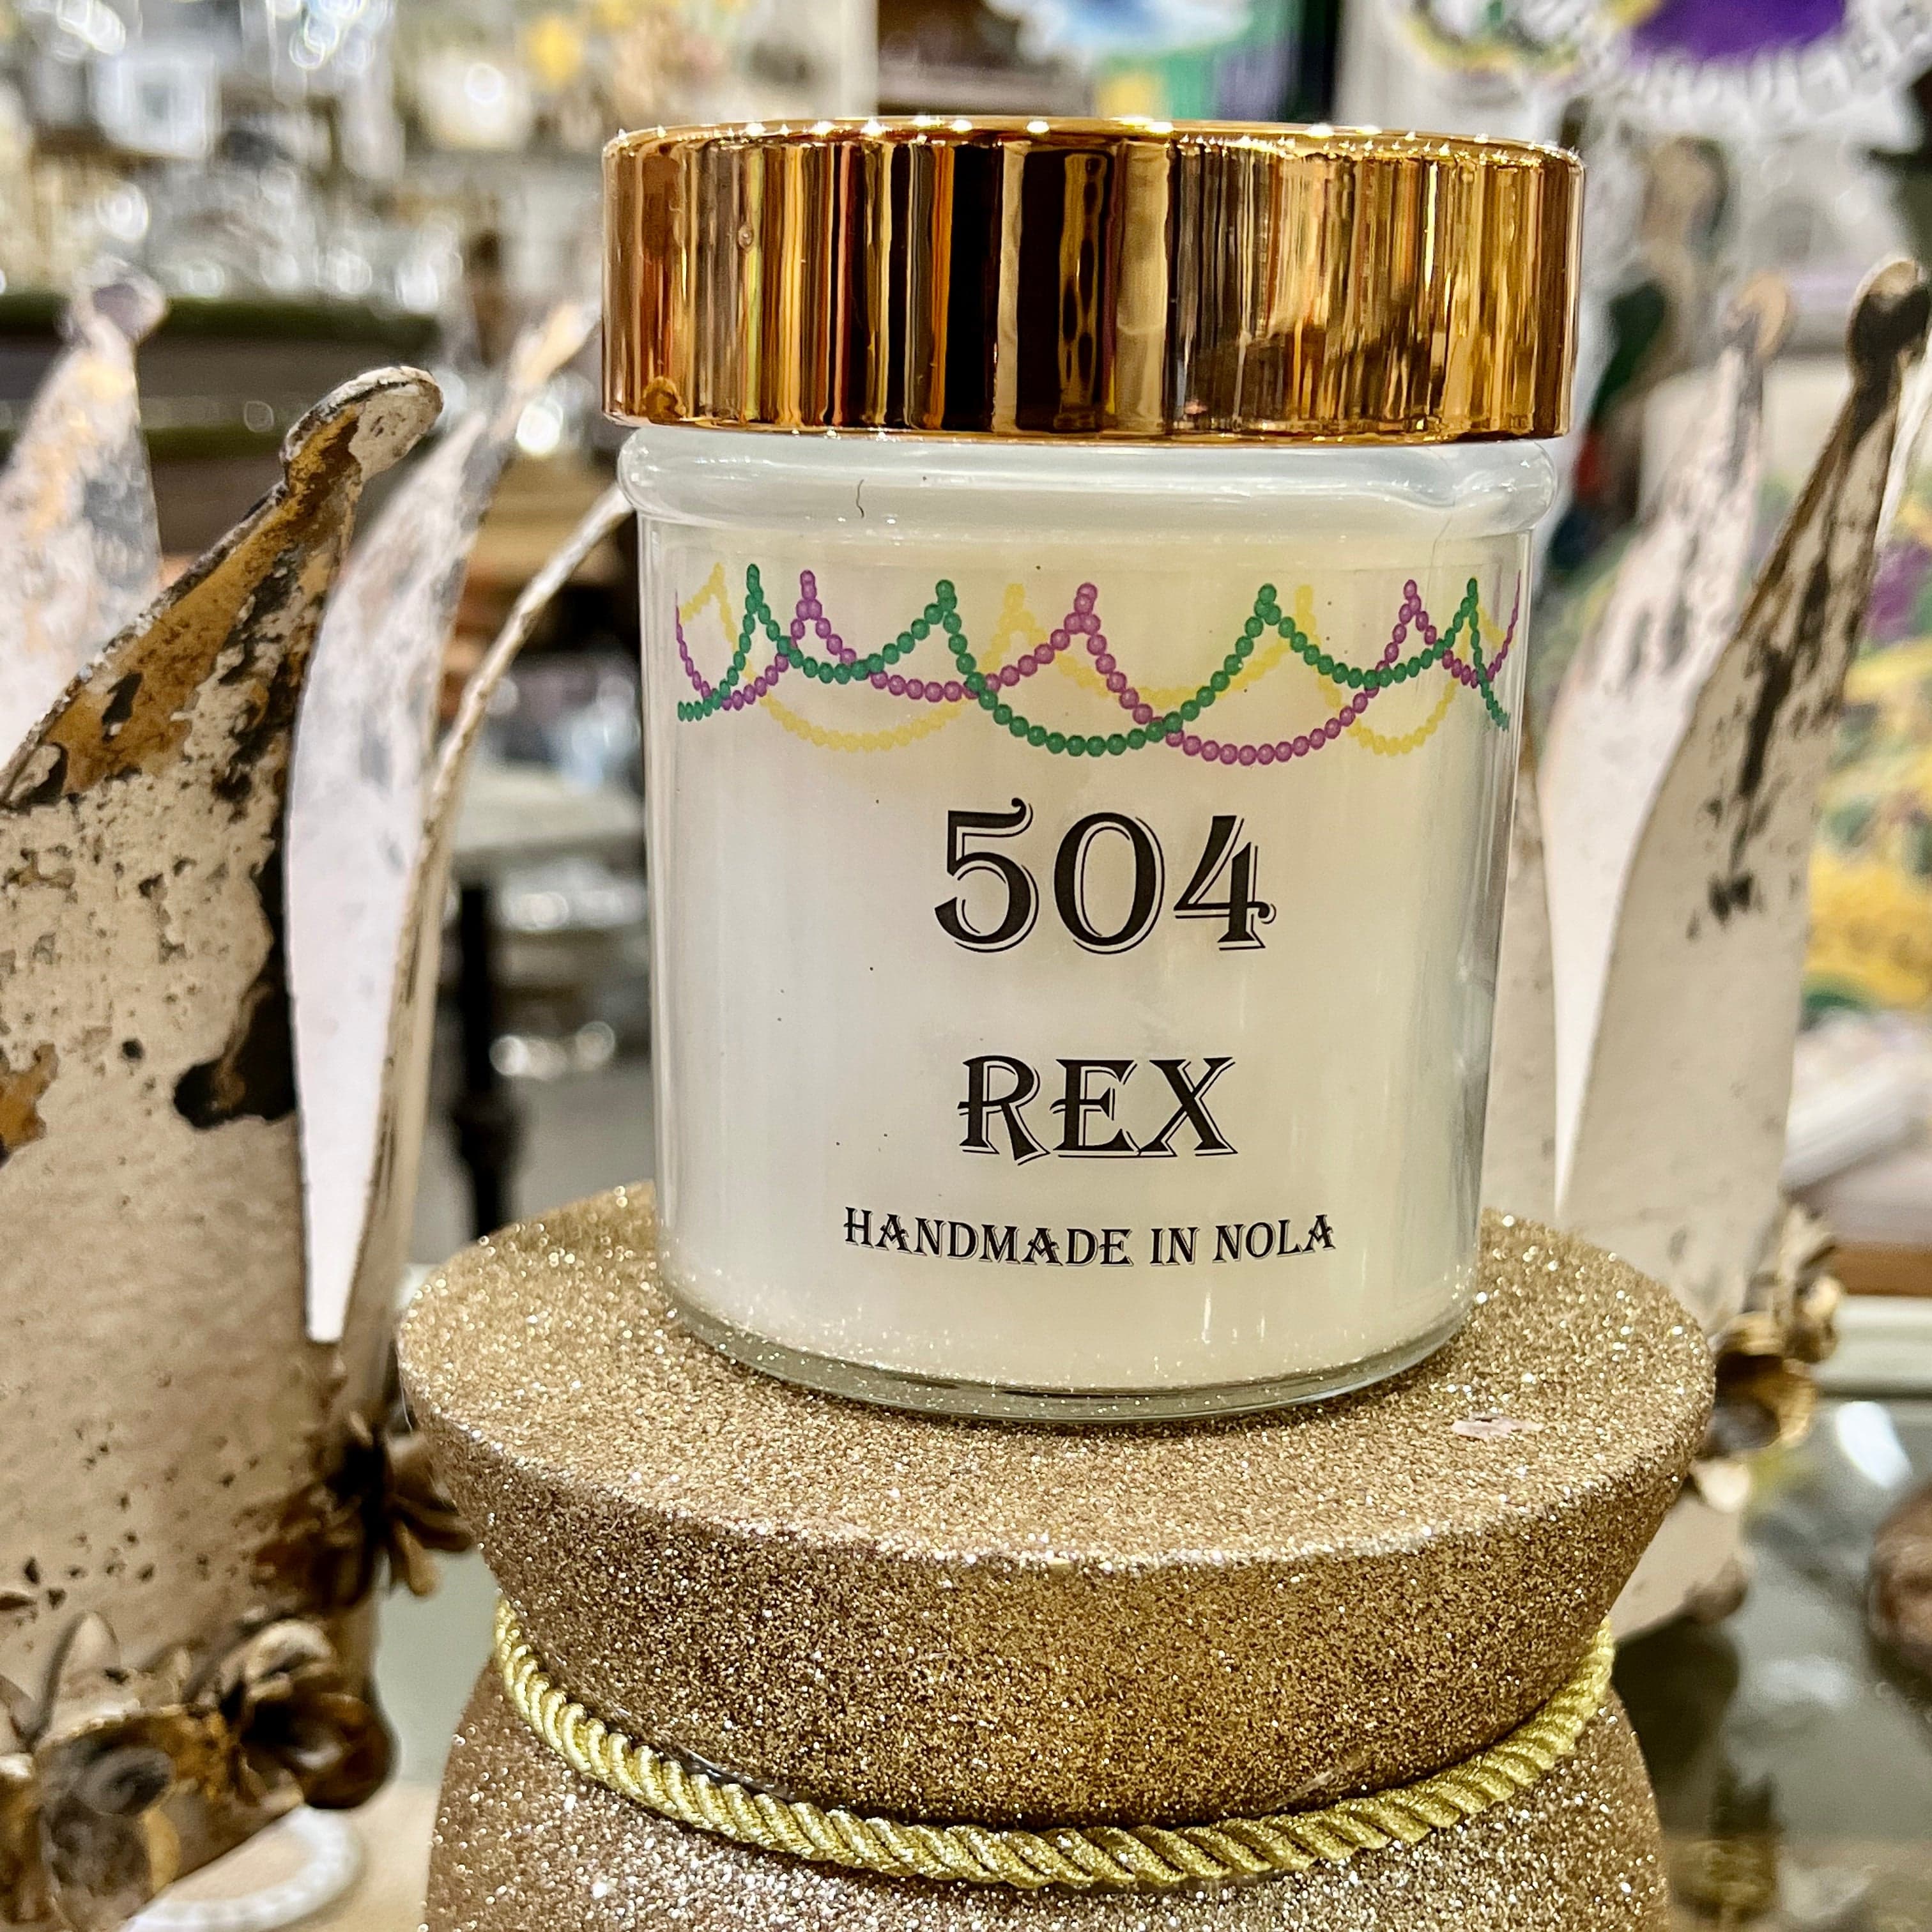 Southern Lights Southern Lights 504 Mardi Gras Krewe Round Candles - Little Miss Muffin Children & Home